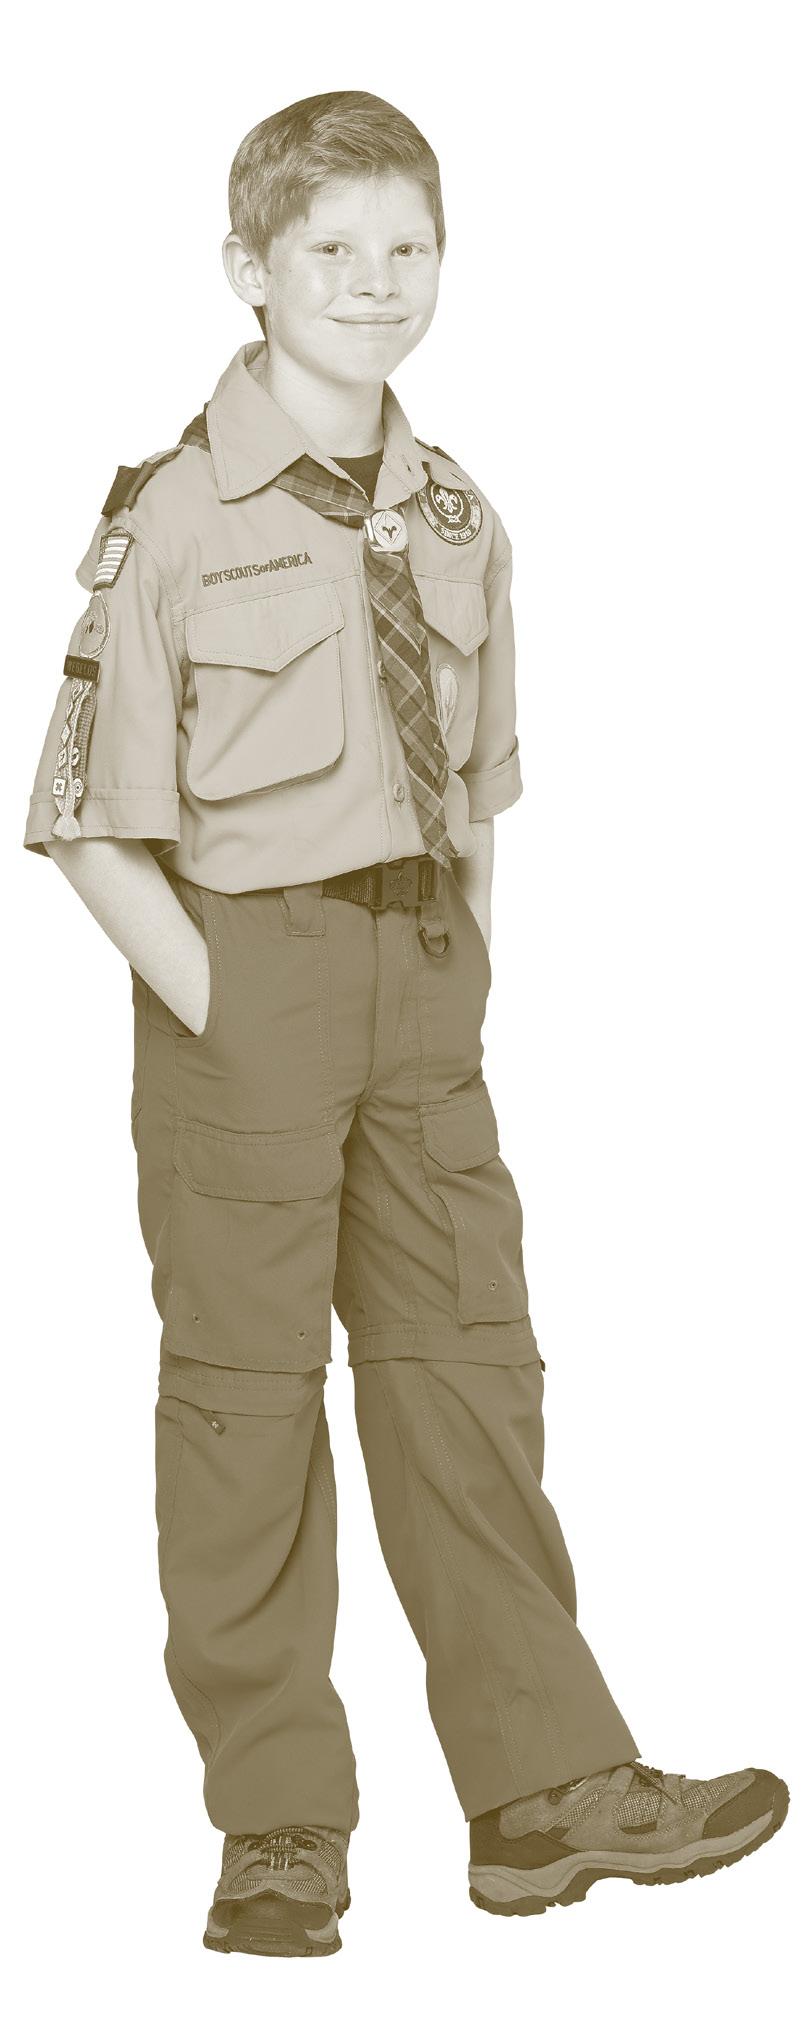 Webelos Scout Uniform Inspection Sheet 20 pts General Appearance. Allow 4 points for each: n Good posture n Clean face and hands n Combed hair n Neatly dressed n Clean fingernails 1 Headgear.